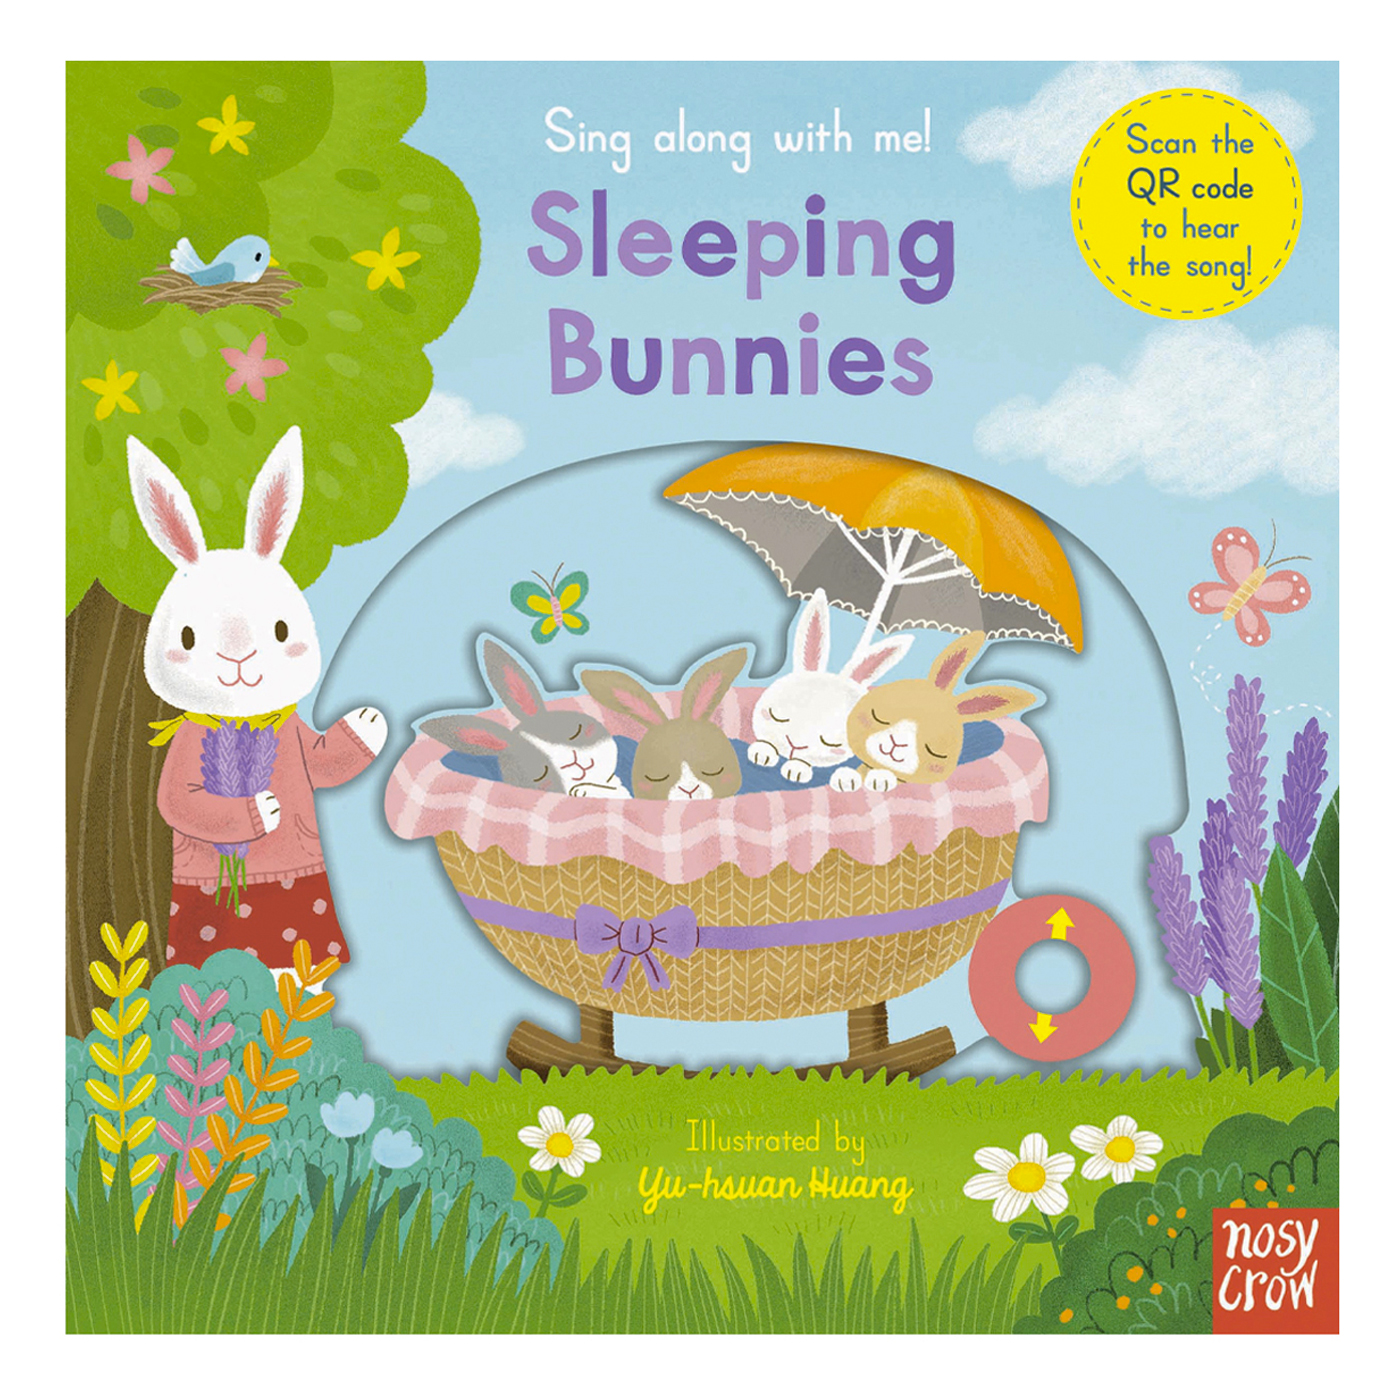 NOSY CROW Sing along with me! Sleeping Bunnies